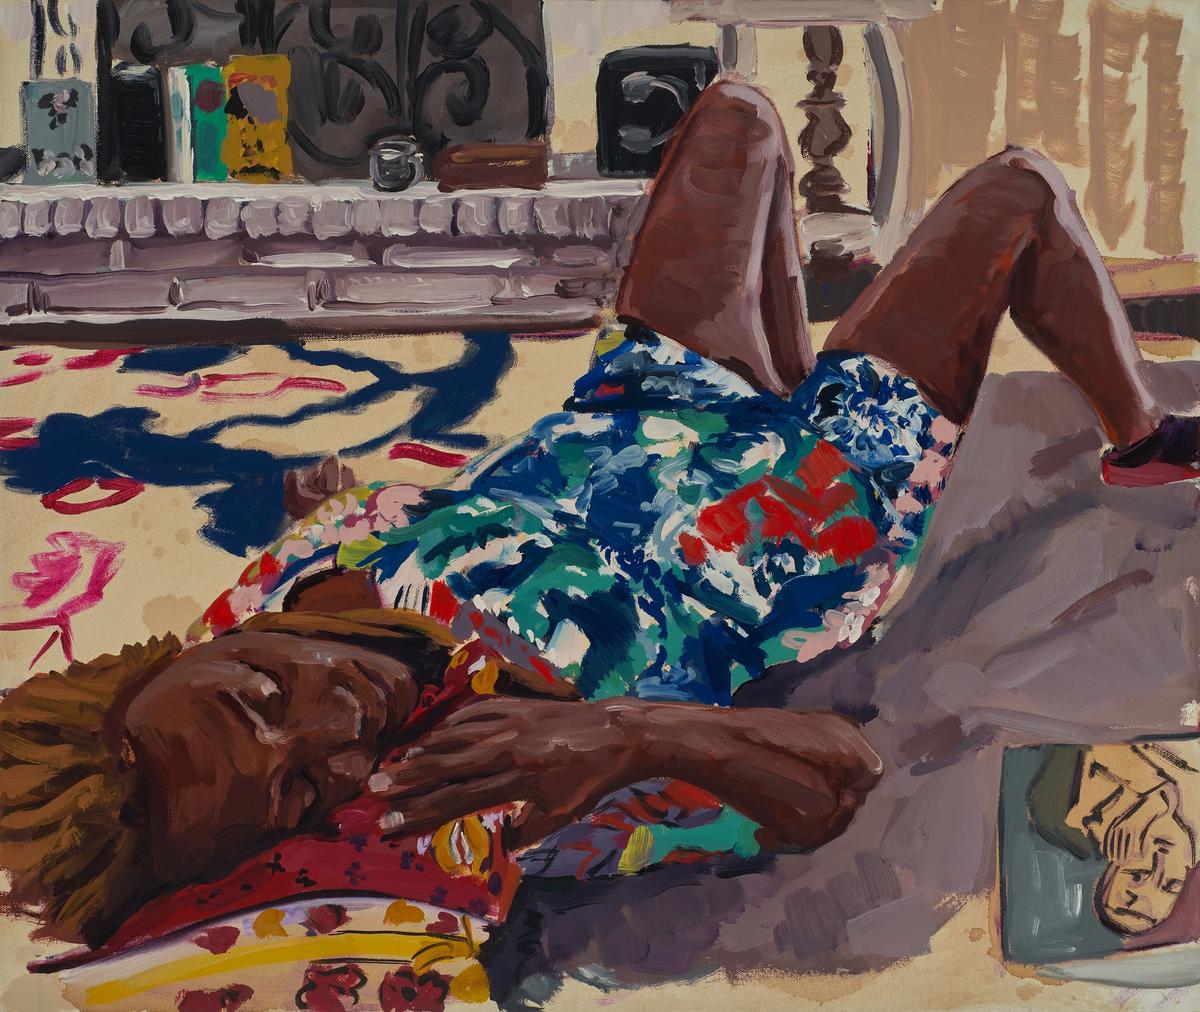 Wangari Mathenge's A Day of Rest (para mi) (2023)

Courtesy of the artist and Pippy Houldsworth Gallery, London